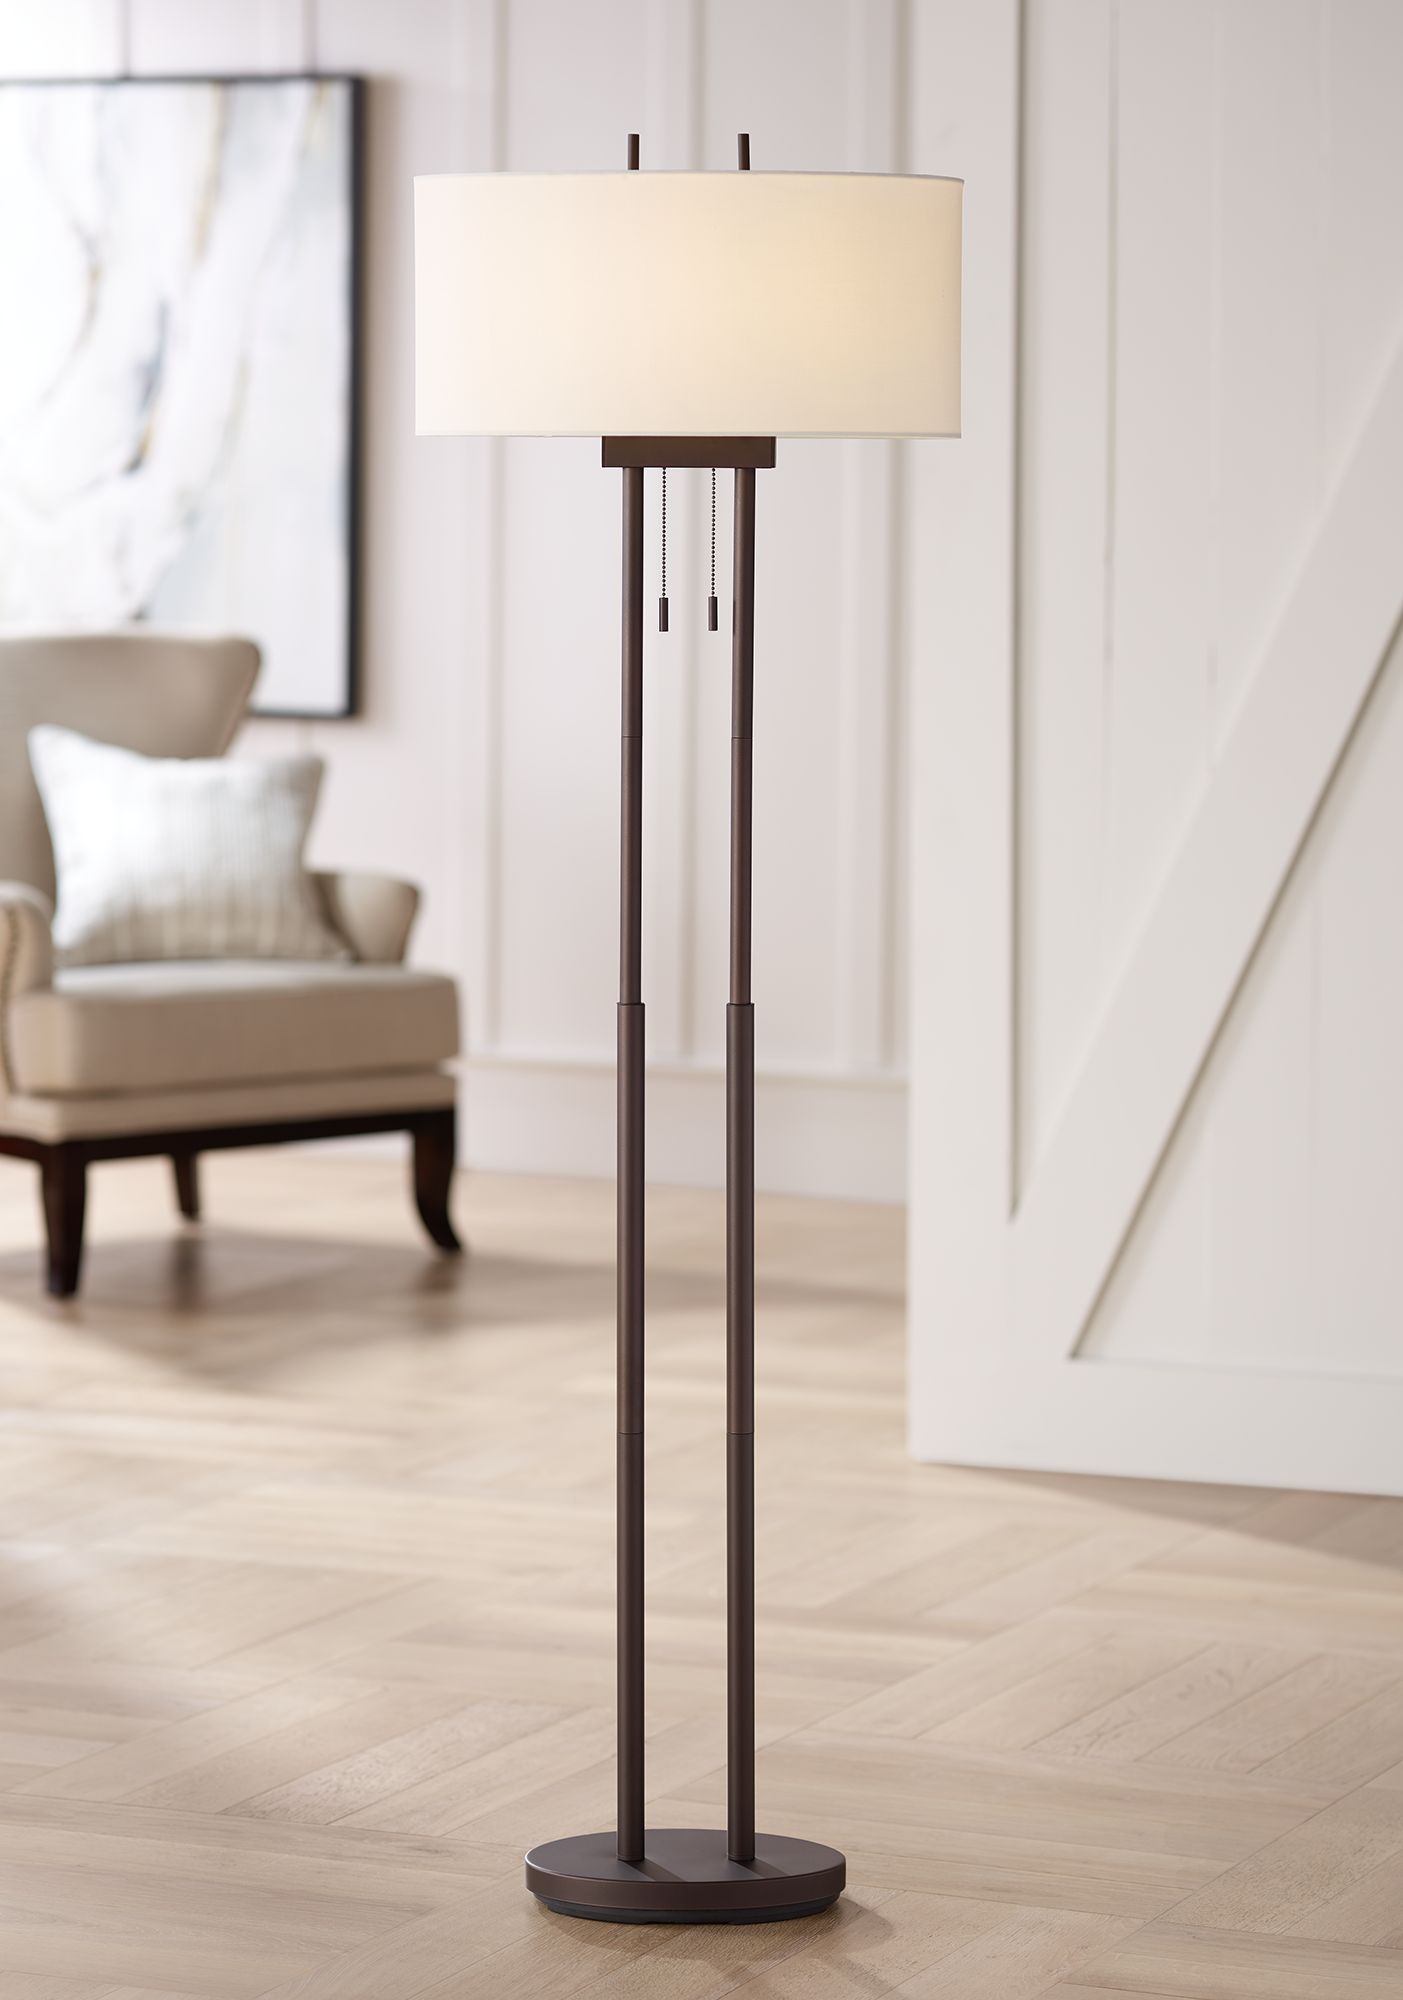 Modern Lighting and Decor - Contemporary Design | Lamps Plus